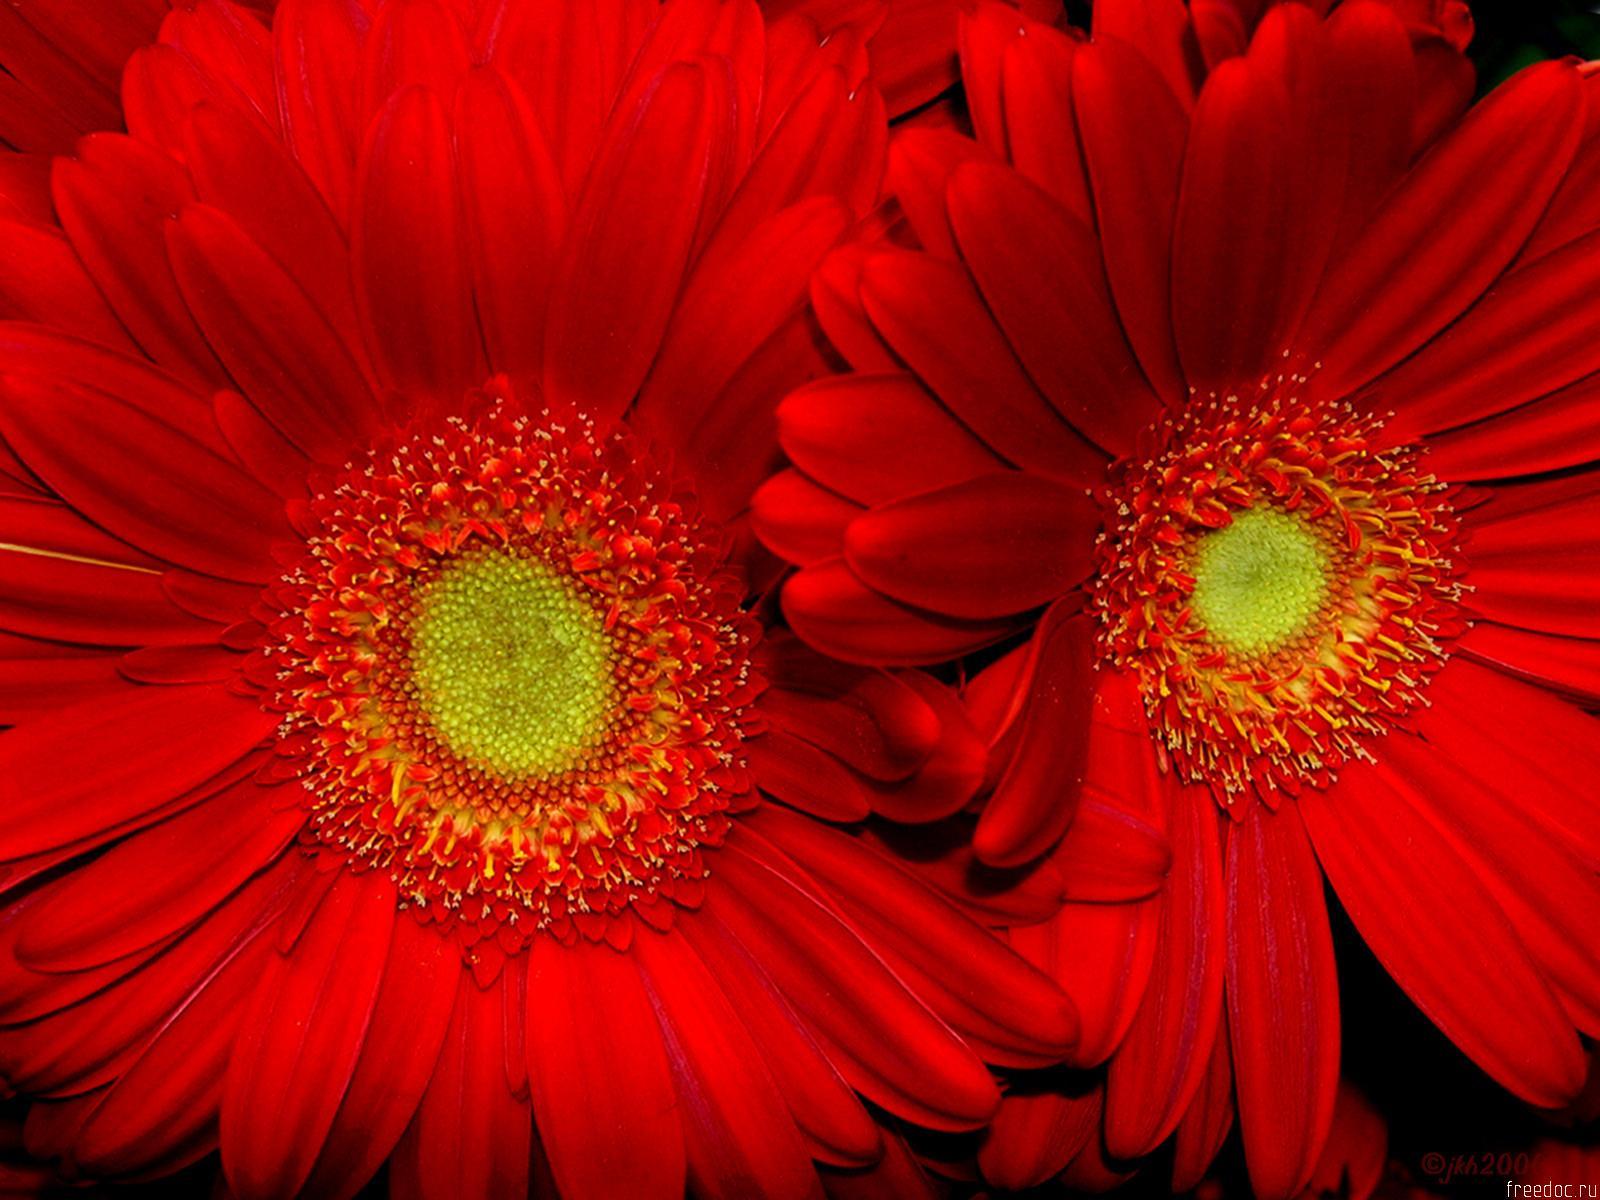 Red Flower Wallpaper Backgrounds Free Download > SubWallpapers